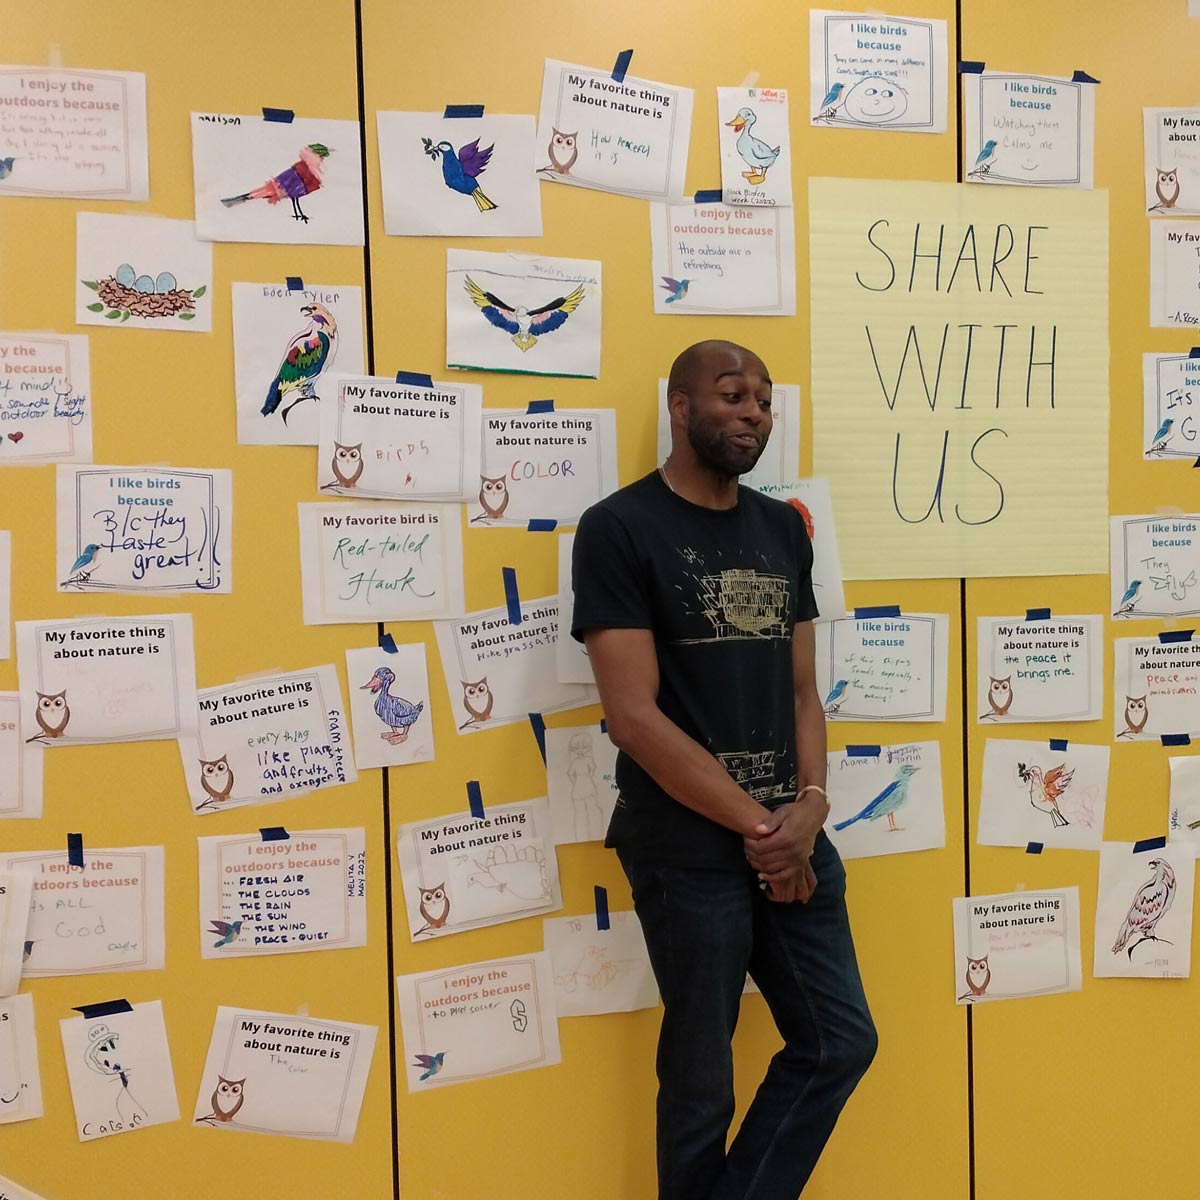 a man stands in front of a yellow wall covered with drawings of and writing about birds